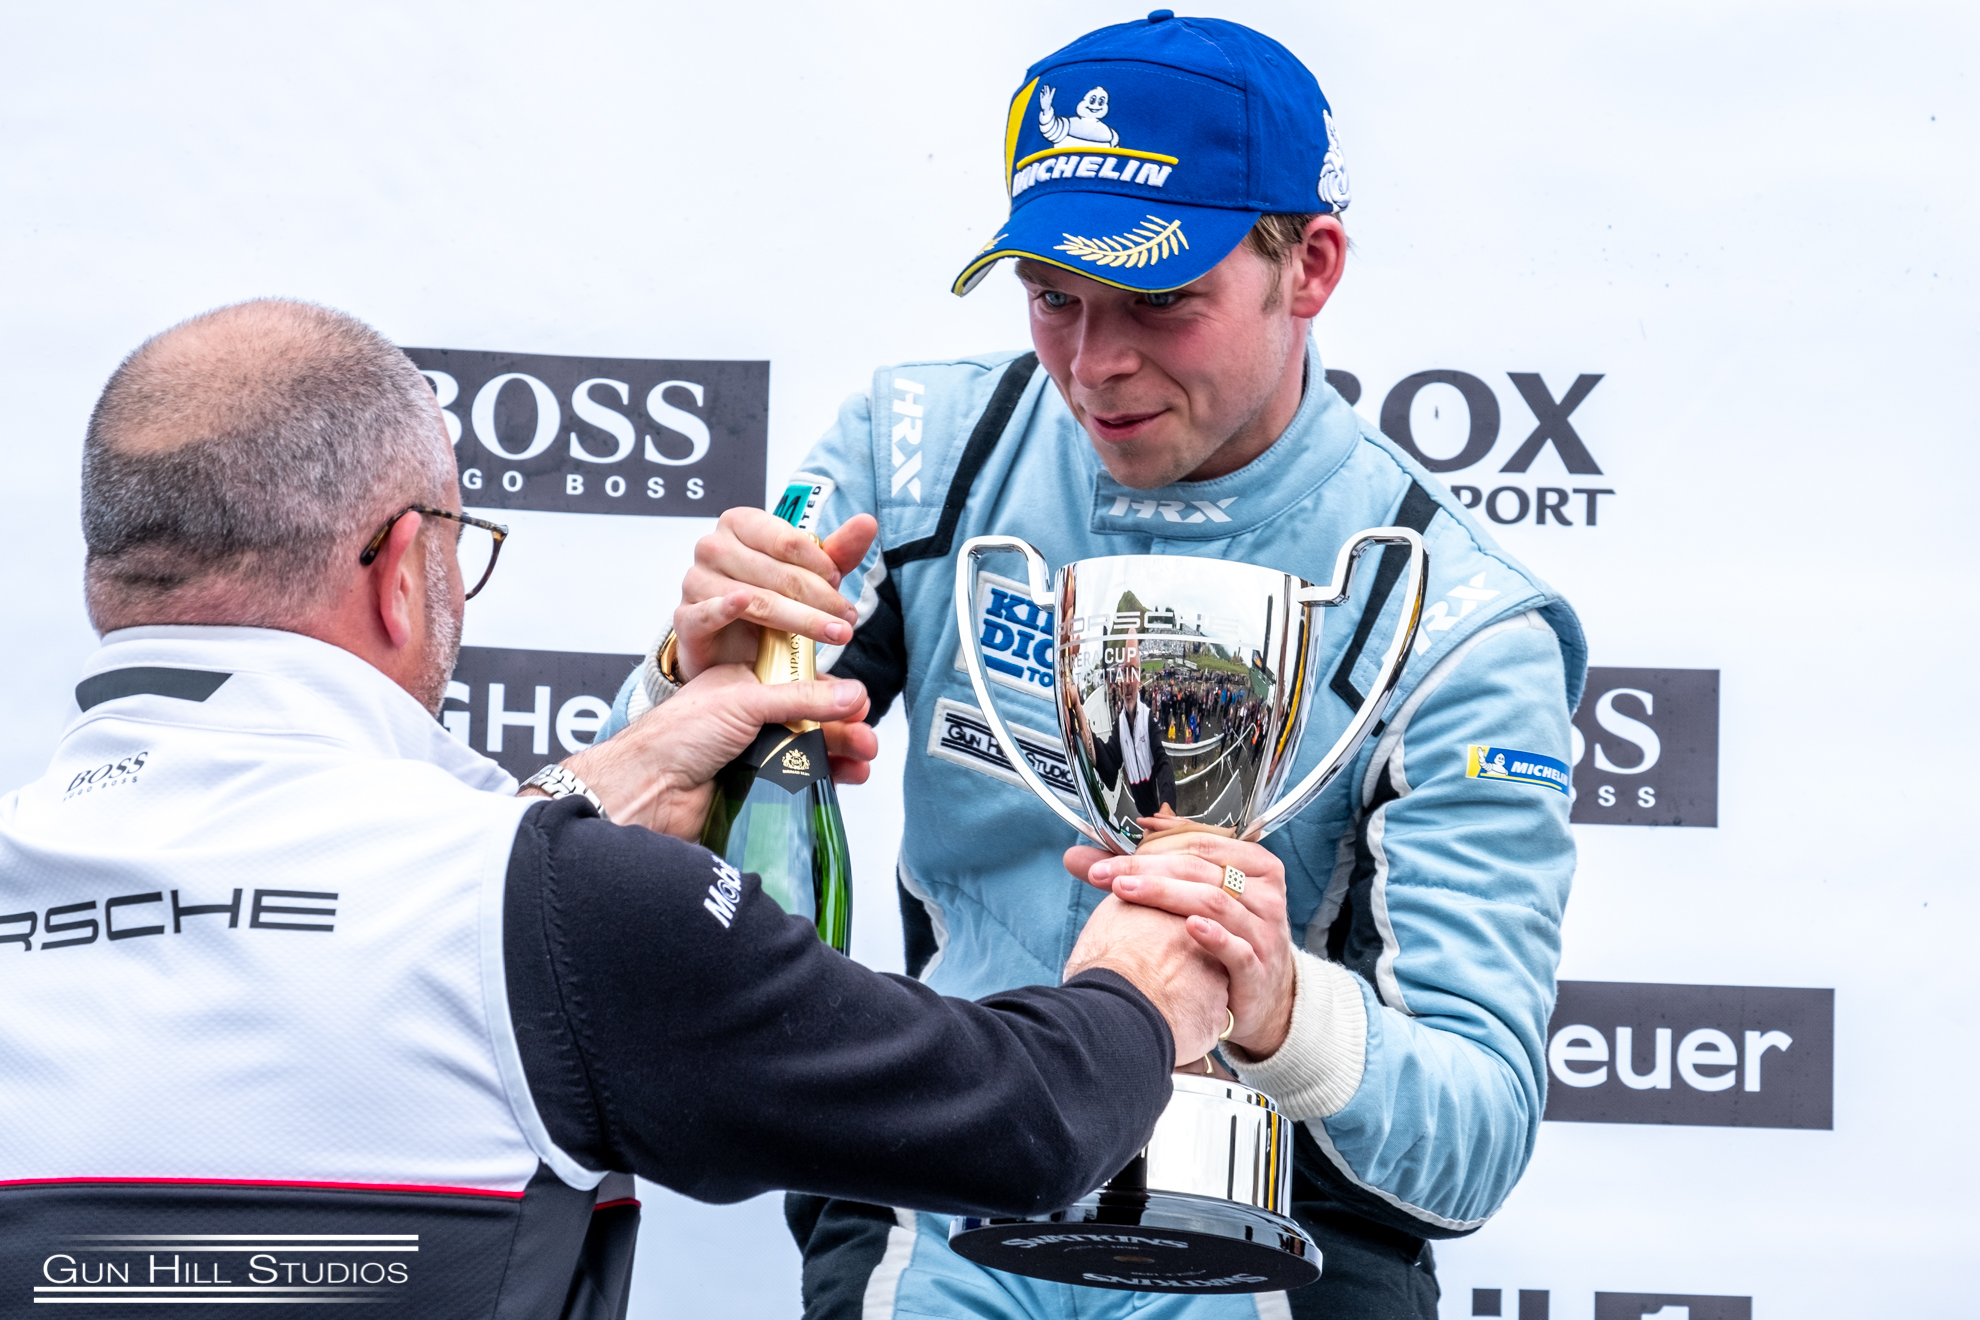 Knockhill – Charles Rainford secures second Porsche Carrera Cup Victory